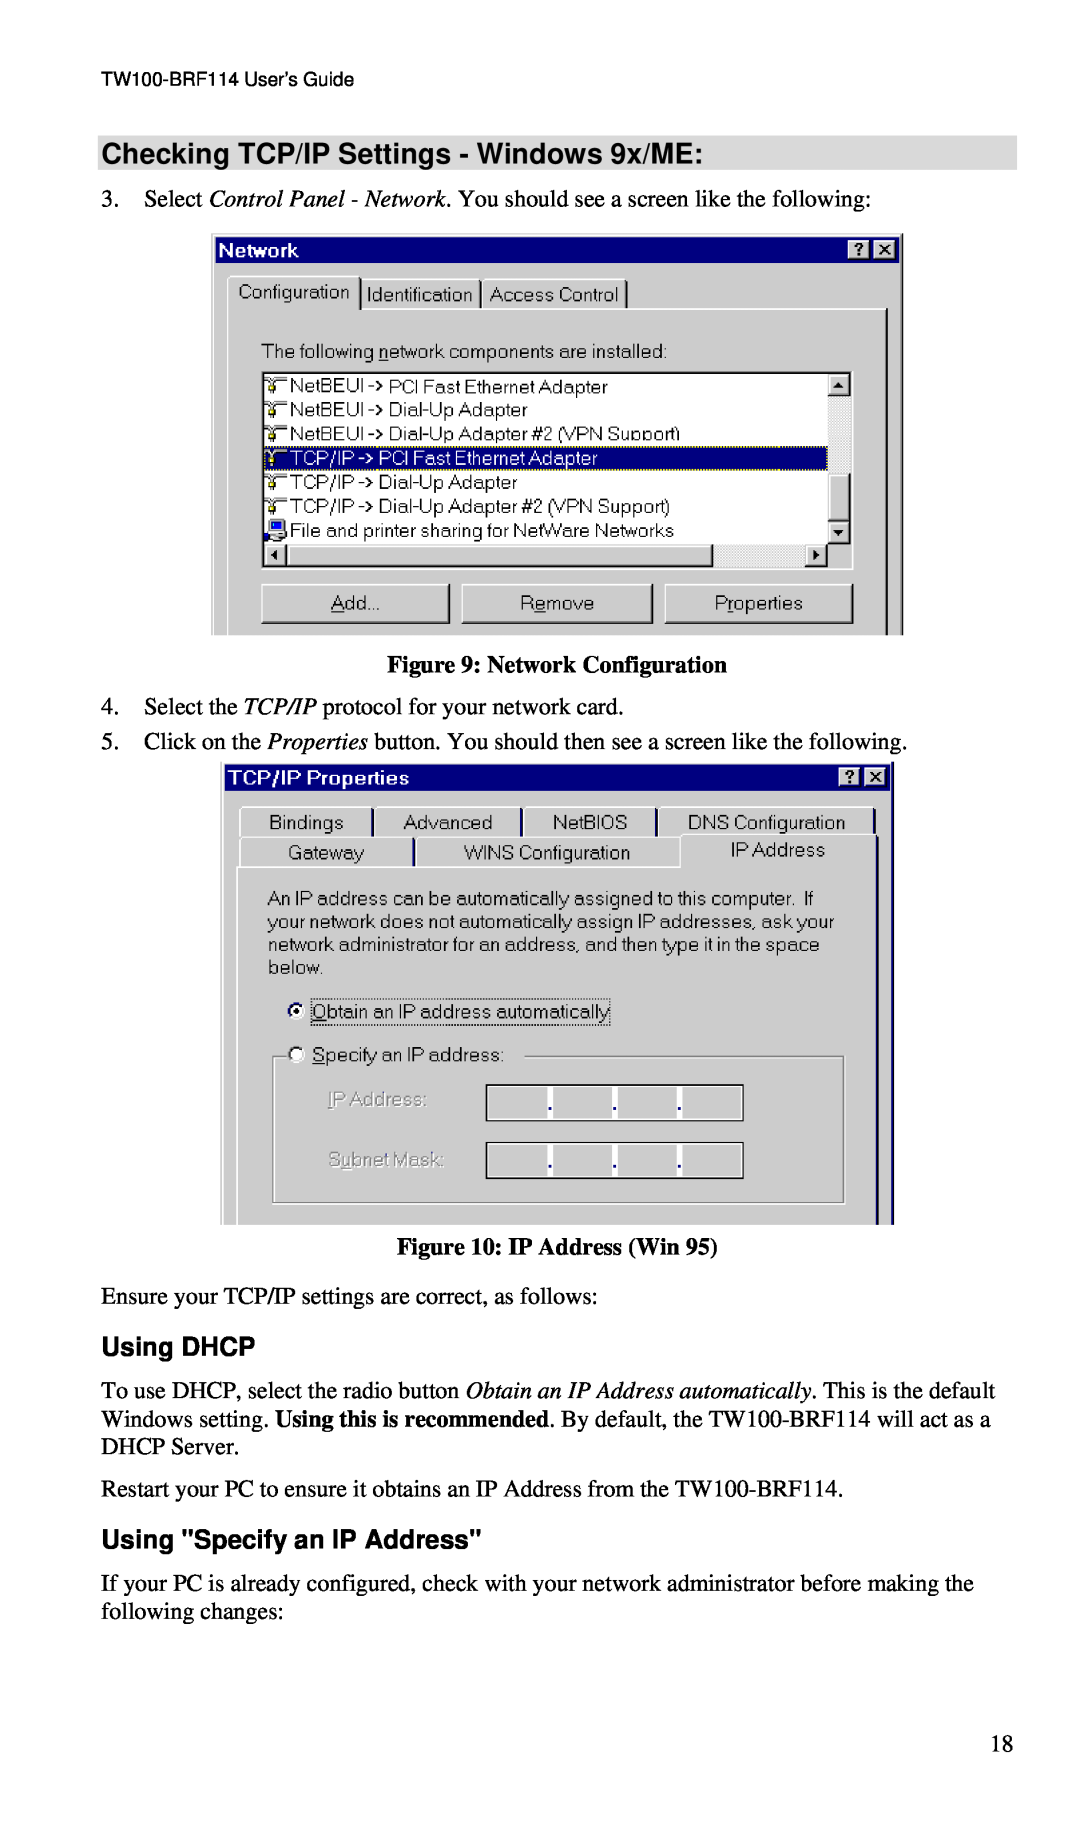 TRENDnet BRF114 Checking TCP/IP Settings - Windows 9x/ME, Using DHCP, Using Specify an IP Address, Network Configuration 